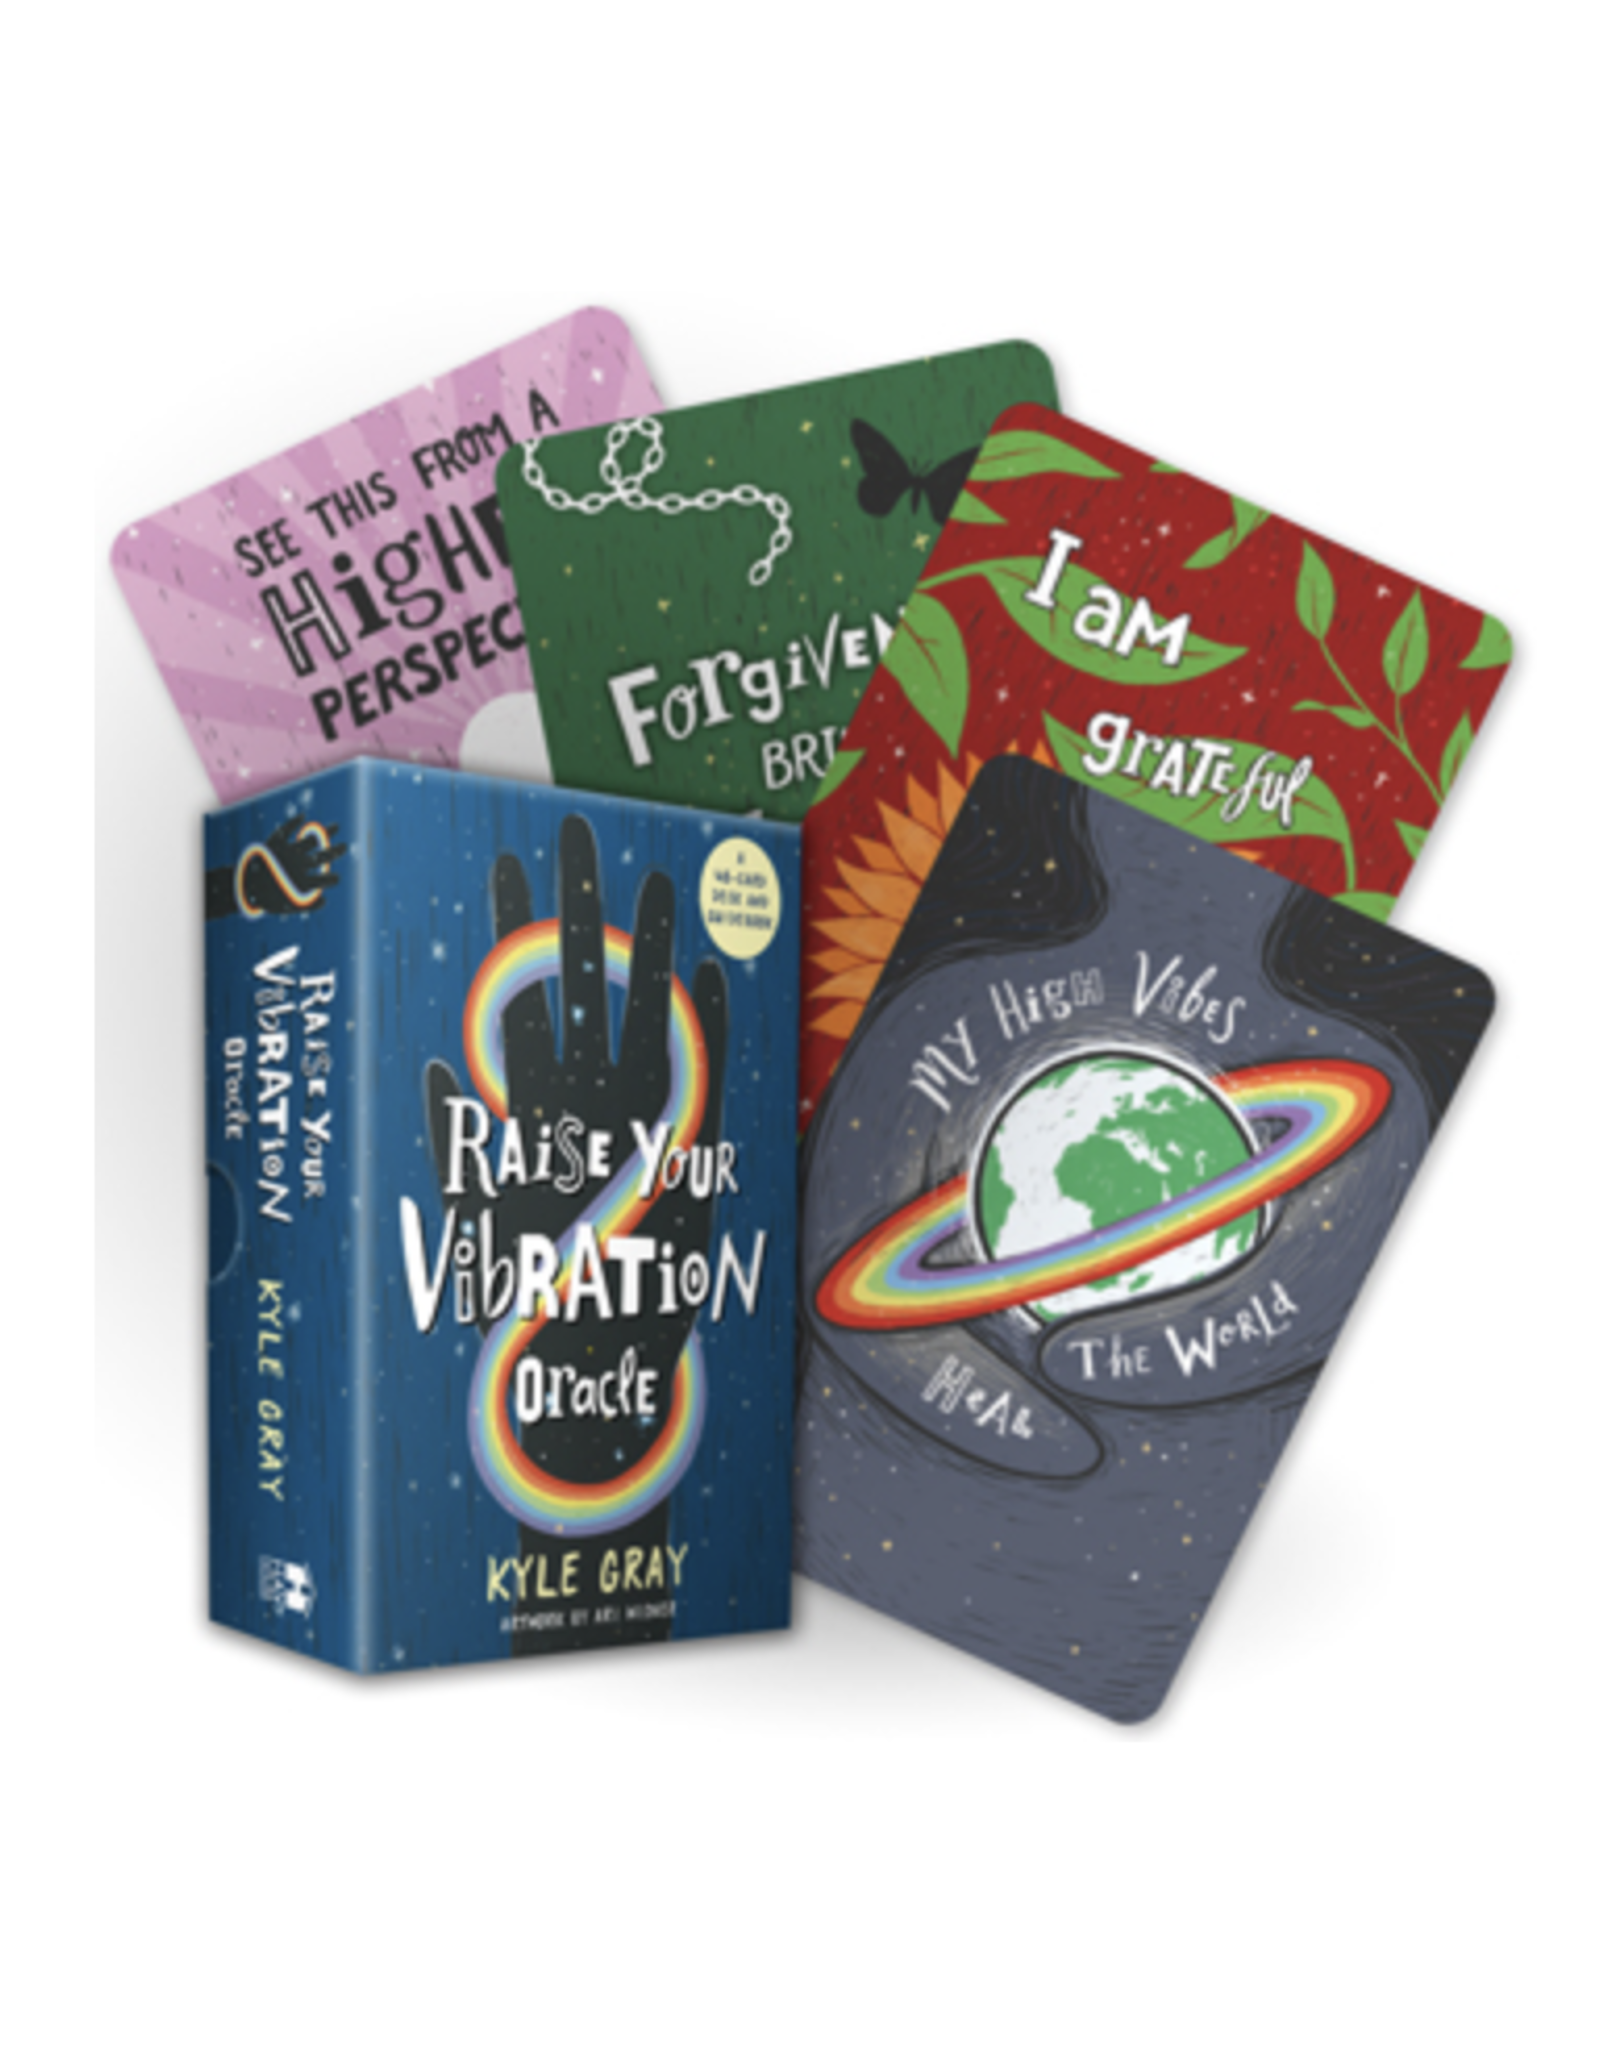 Raise Your Vibration Oracle Deck (November 2022) - A 48-Card Deck and Guidebook